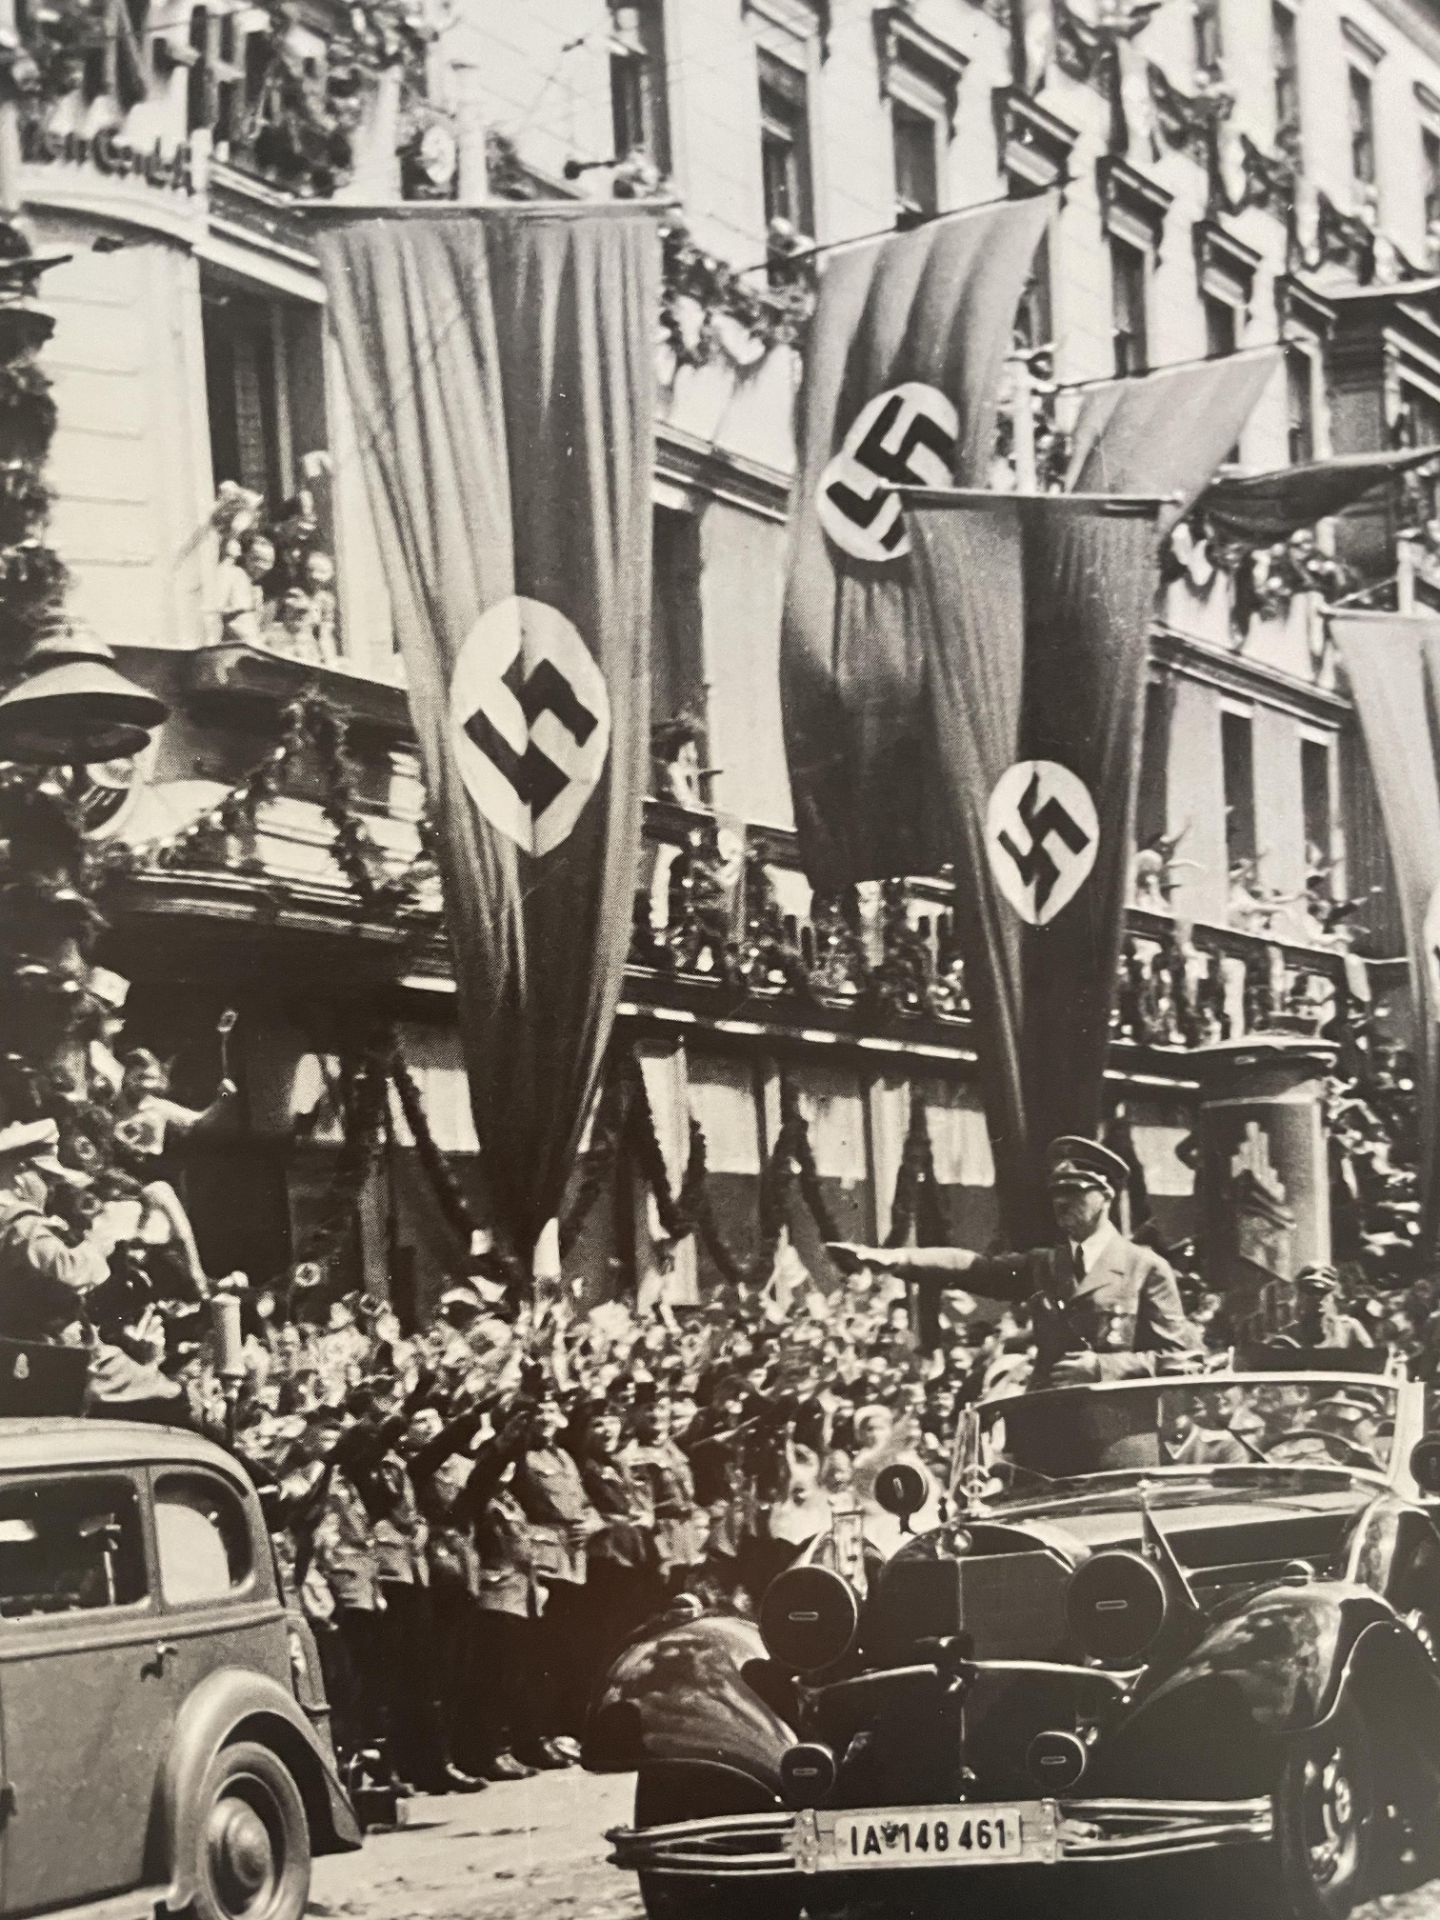 Germany "WWII, Adolf Hitler, Victory Parade" Print - Image 2 of 6